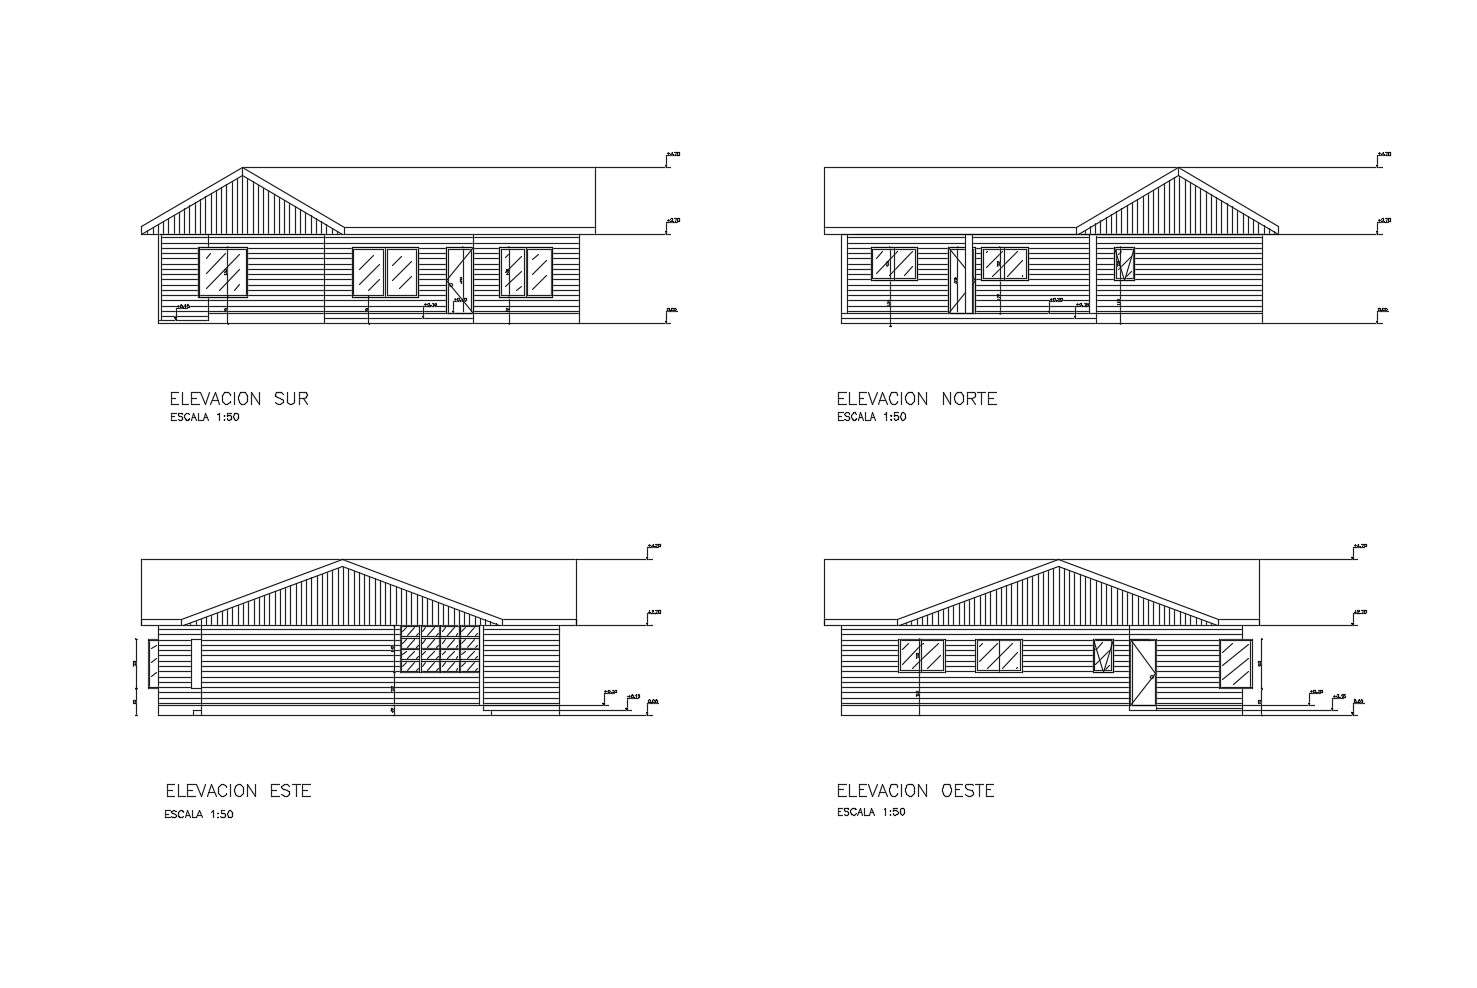 Help with a house plan front elevation? - Pro - SketchUp Community